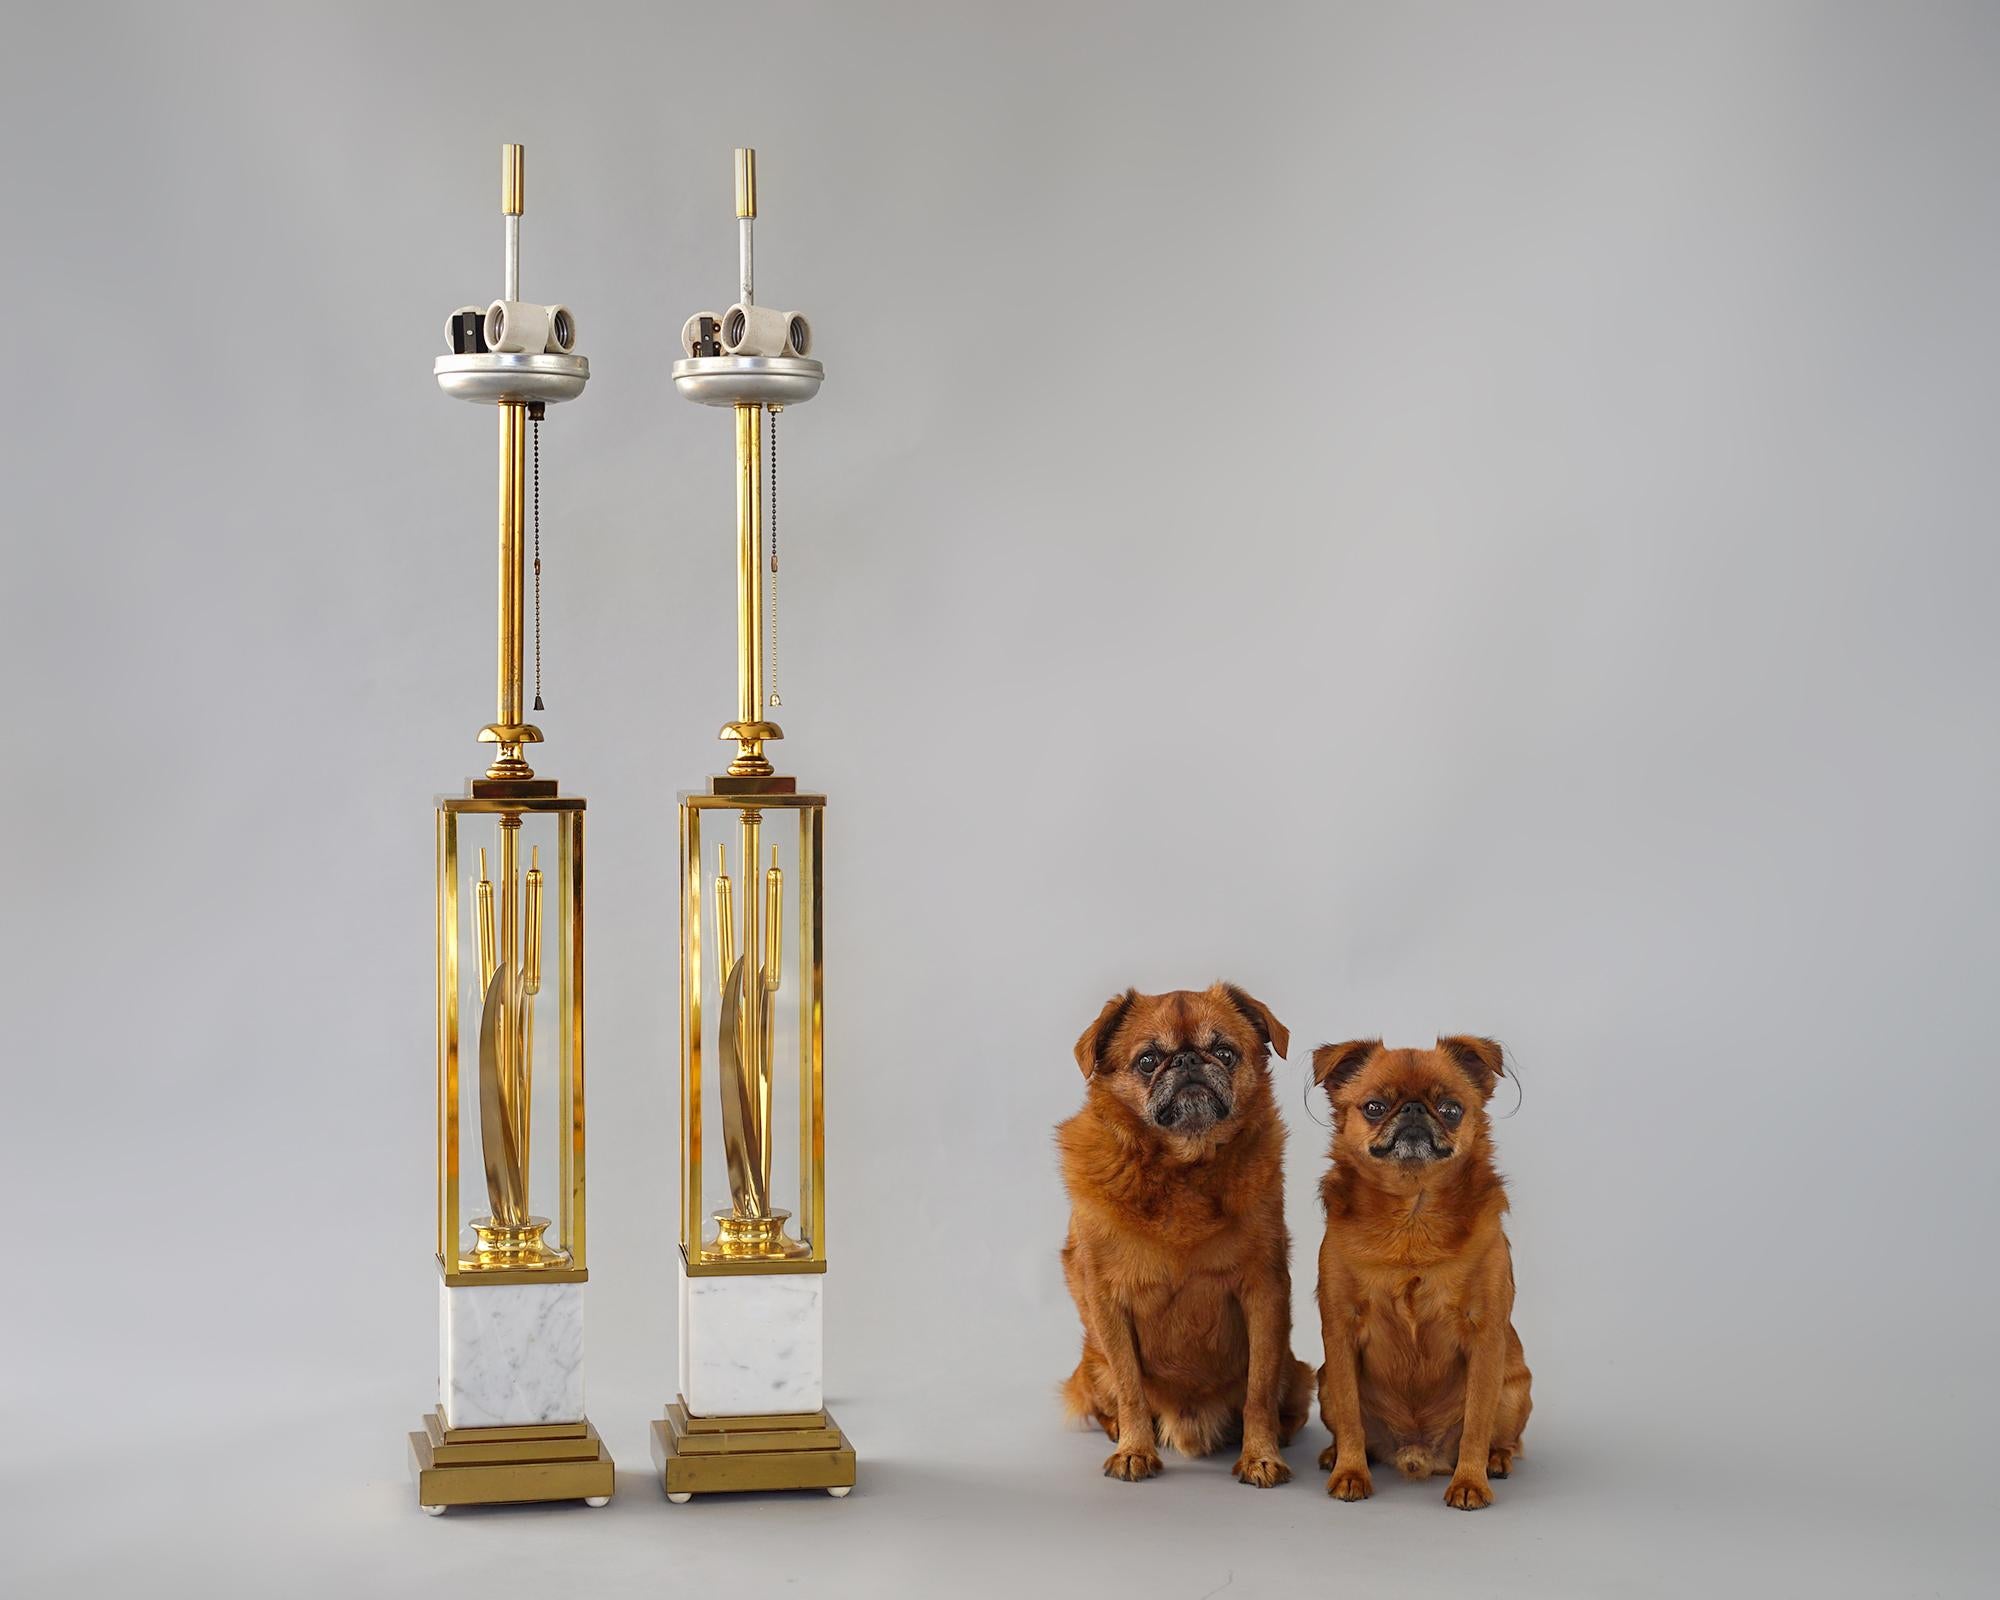 Modernist cattails sculptures encased in brass and glass vitrines. Original triple porcelain sockets with three-way pull chain switch. Elevated on Italian marble pedestals with brass ziggurat form bases and original white hemispherical feet.